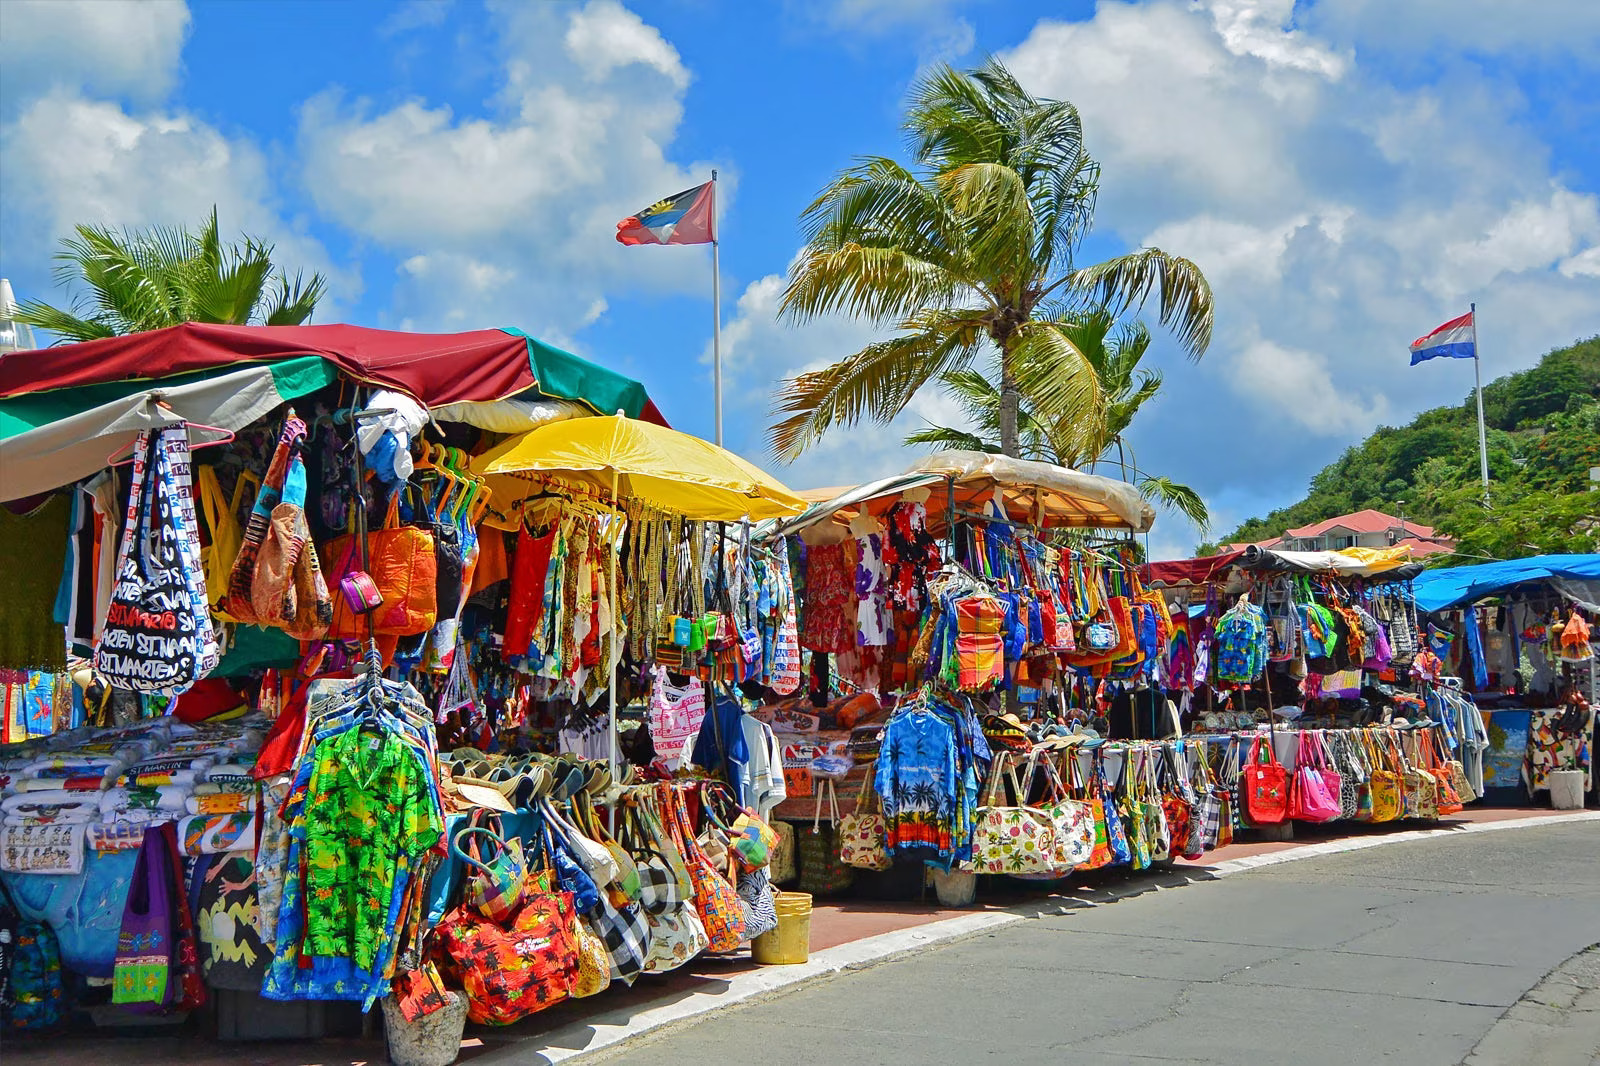 St. Maarten/St. Martin’s Best Souvenirs: Shopping for Unique Local Crafts and Products